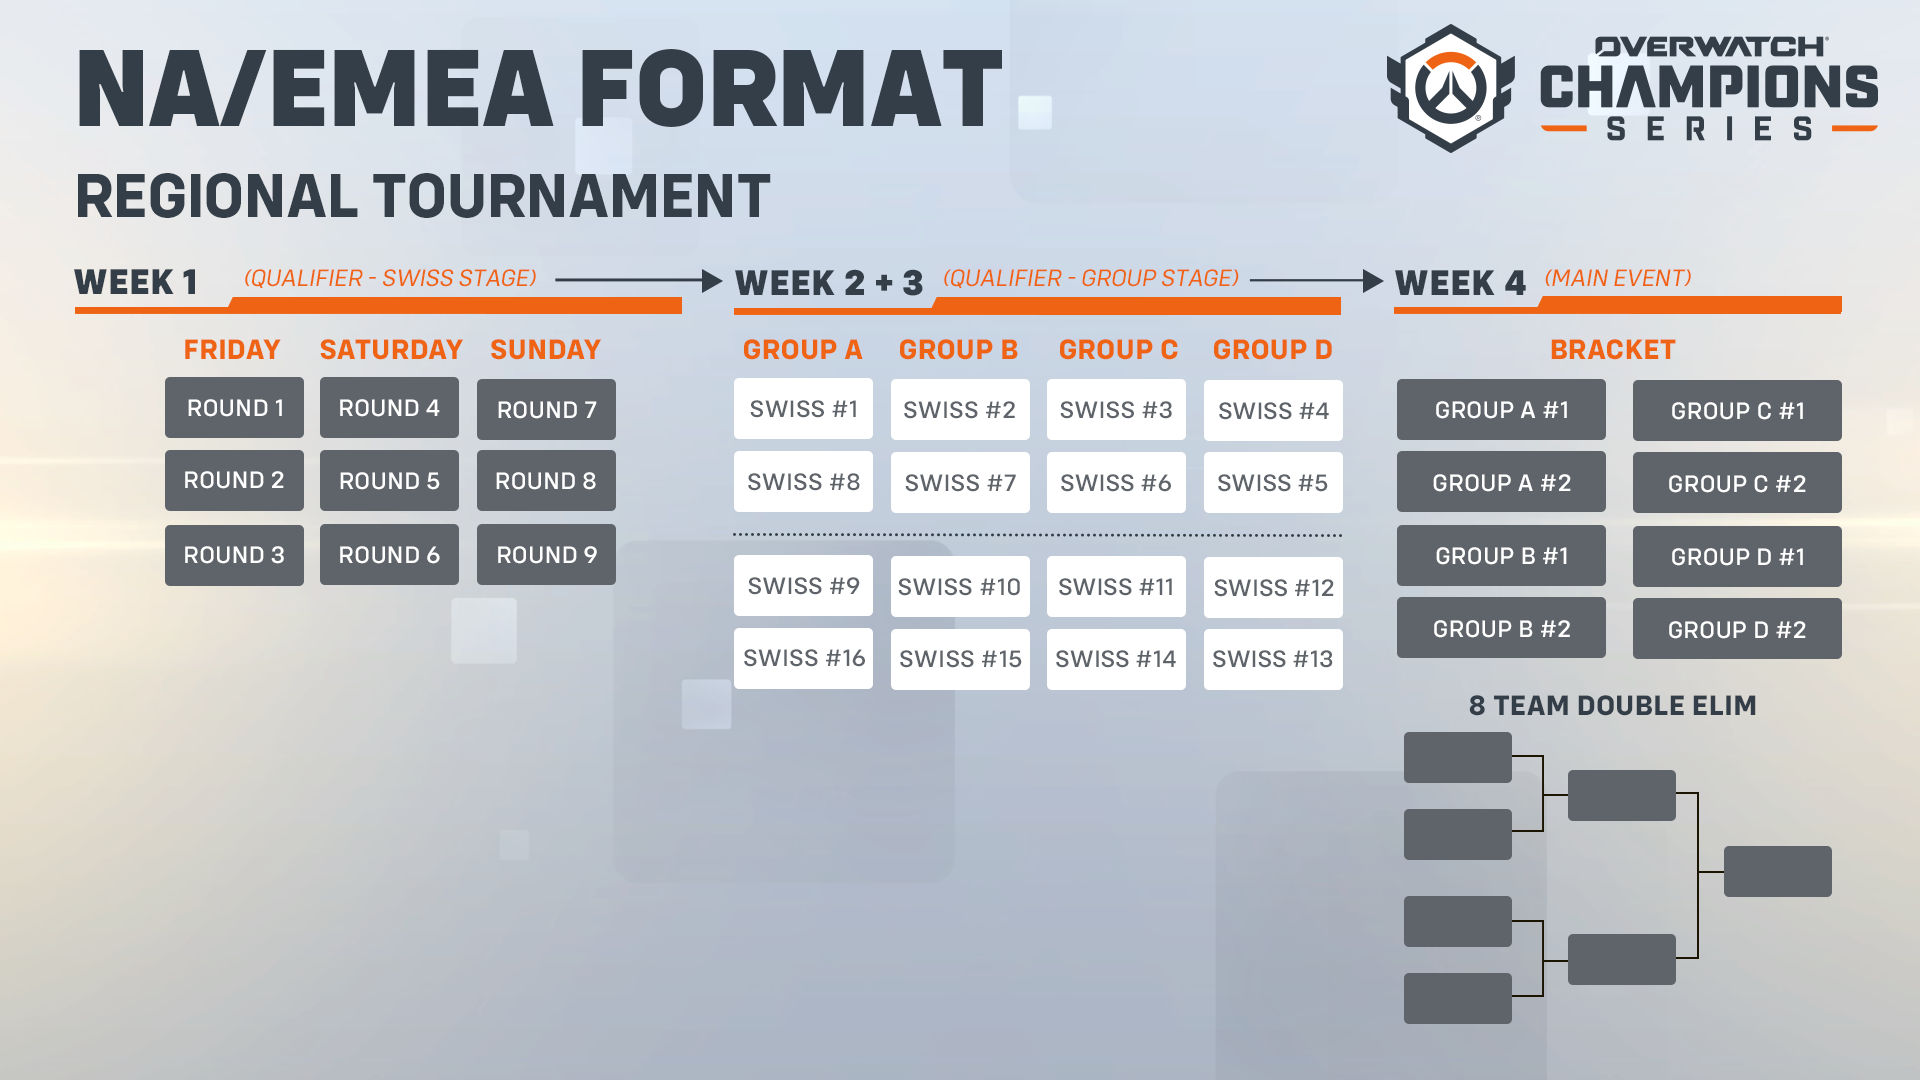 Check out NA/EMEA format